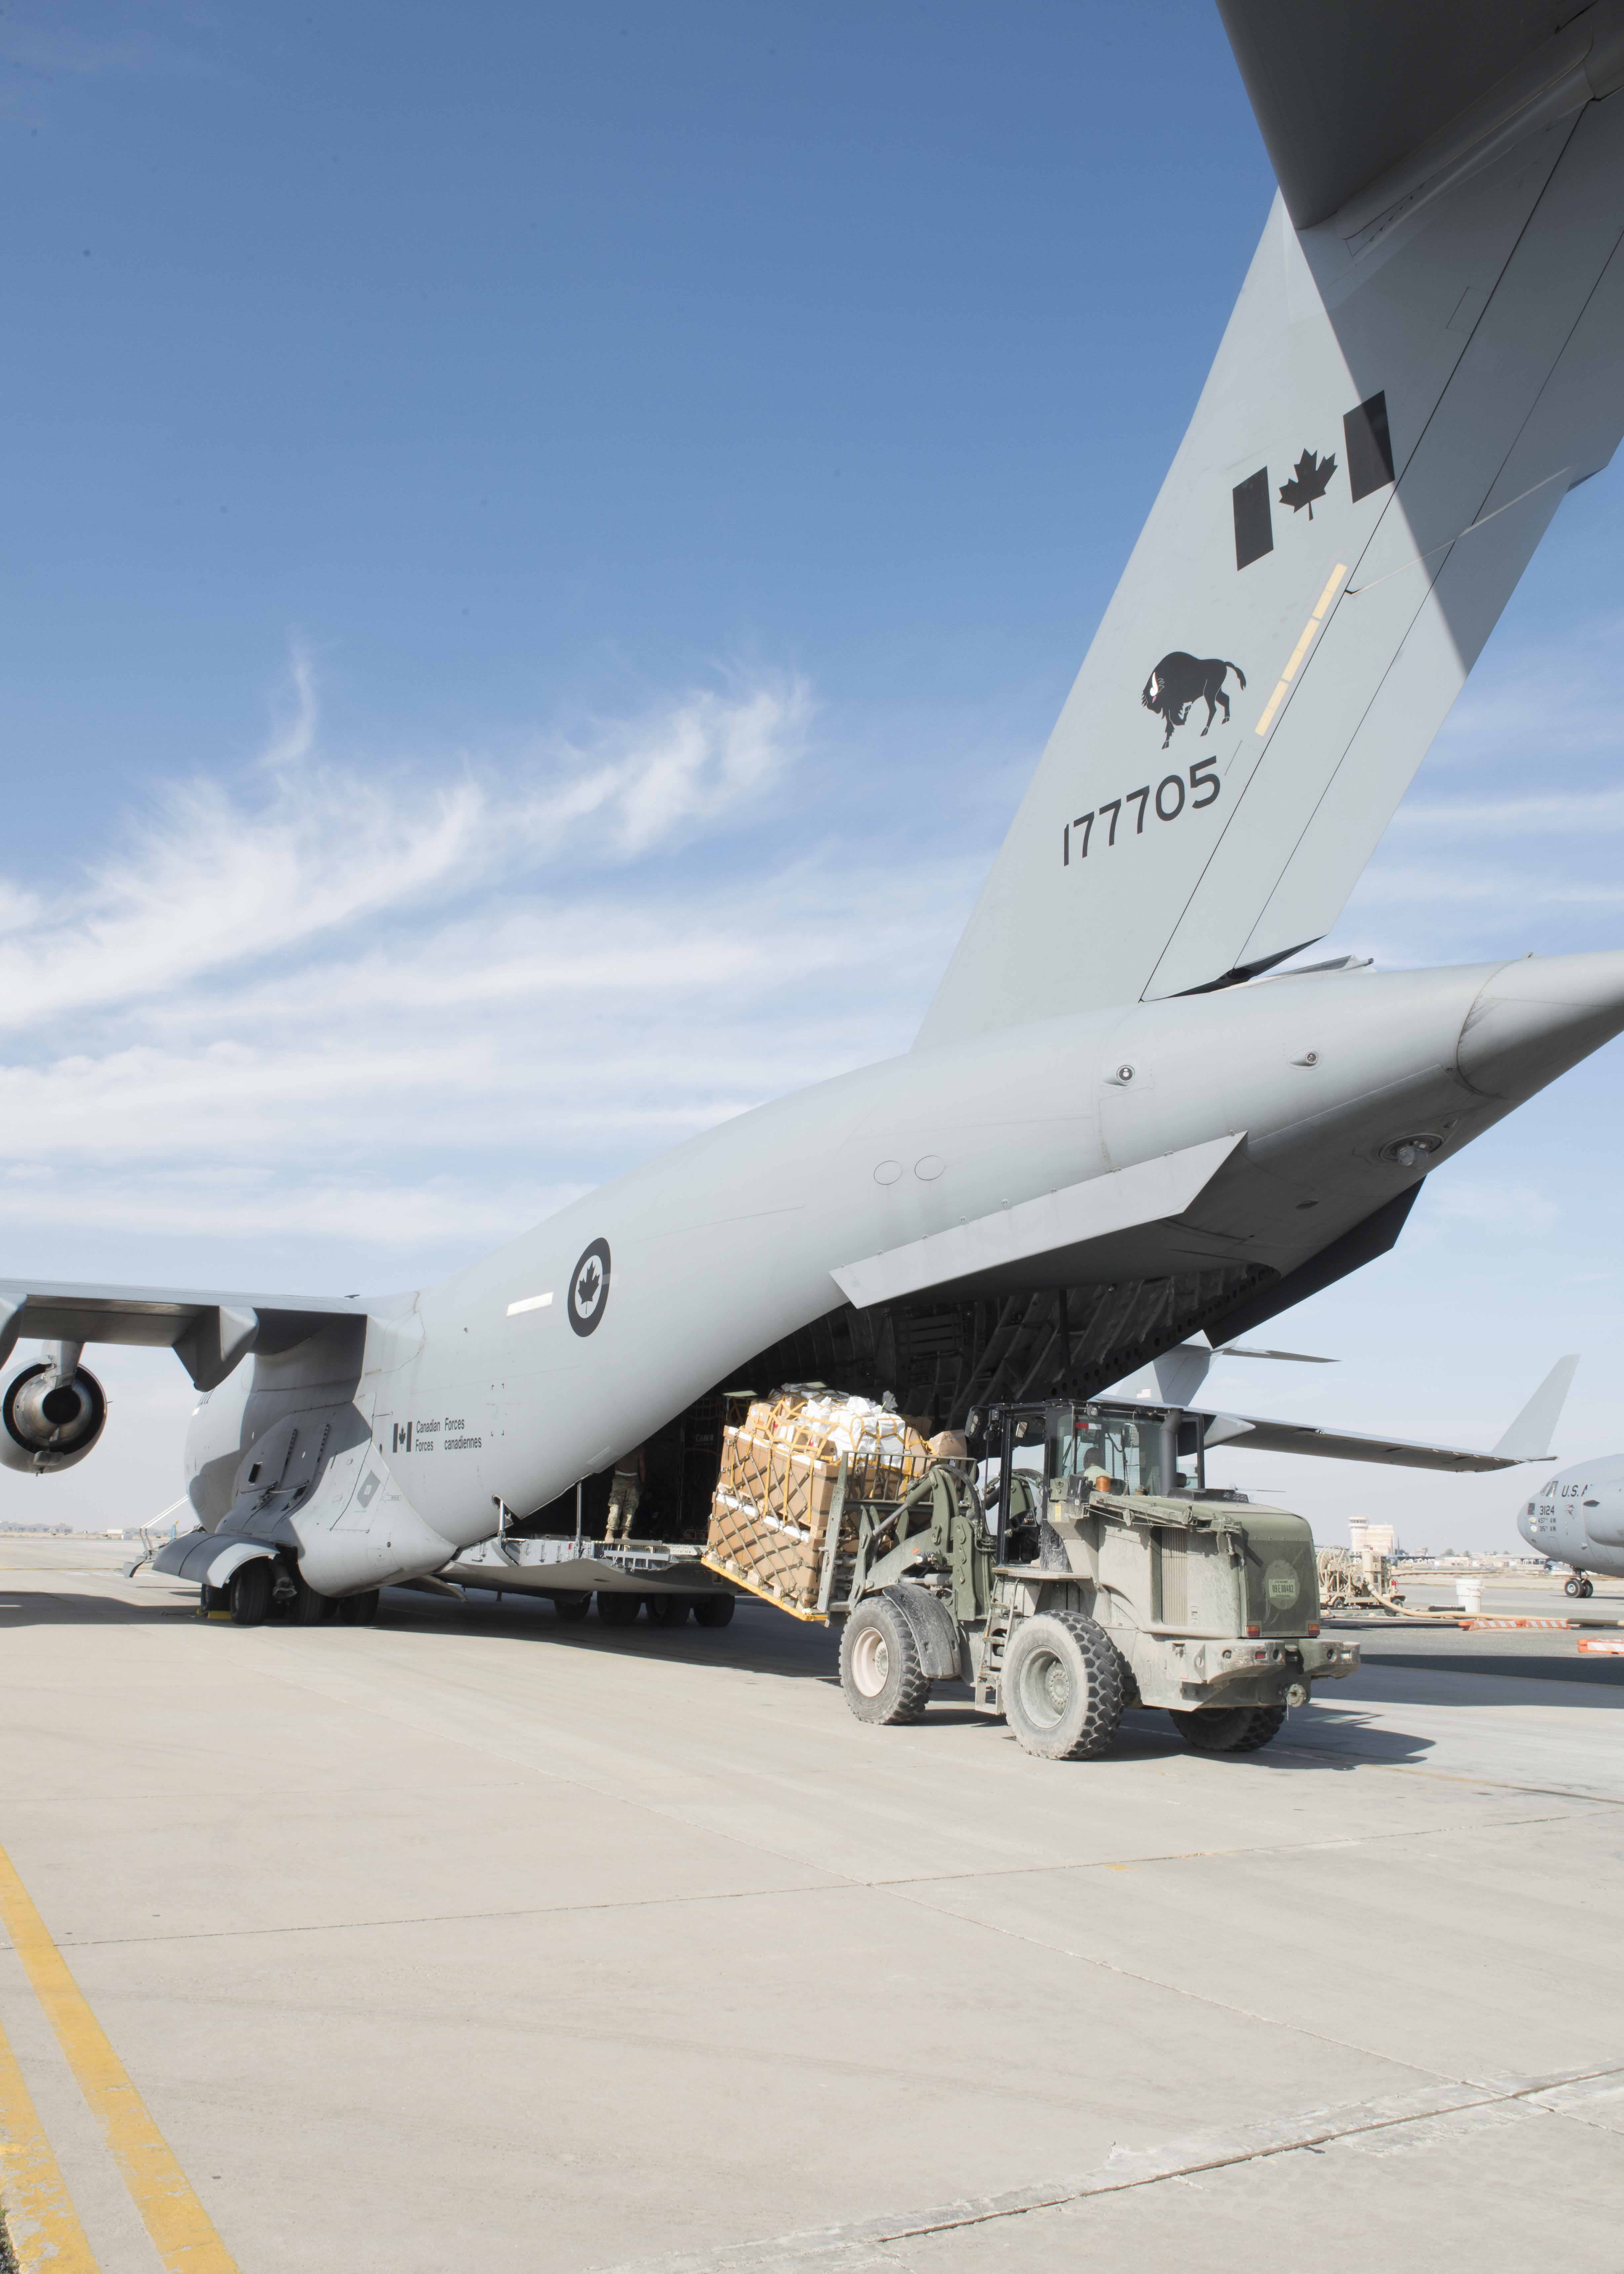 A coalition member removes a pallet from a Canadian Forces CC-177 sustainment flight at Ali Al Salem Air Base, November 26, 2018. Image by:  Op IMPACT Imaging